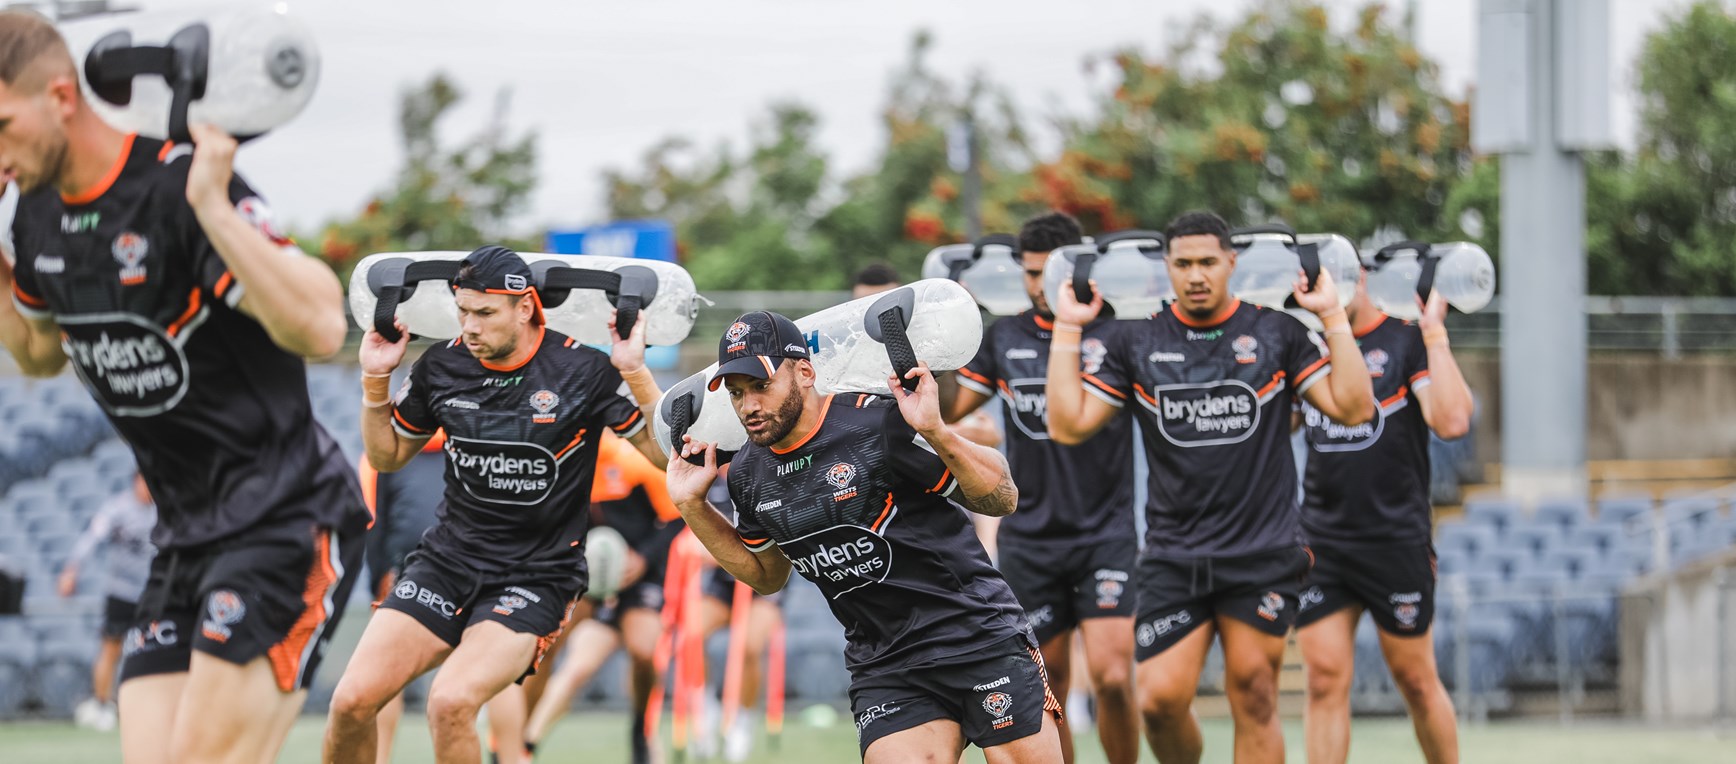 Gallery: Field session at Campbelltown